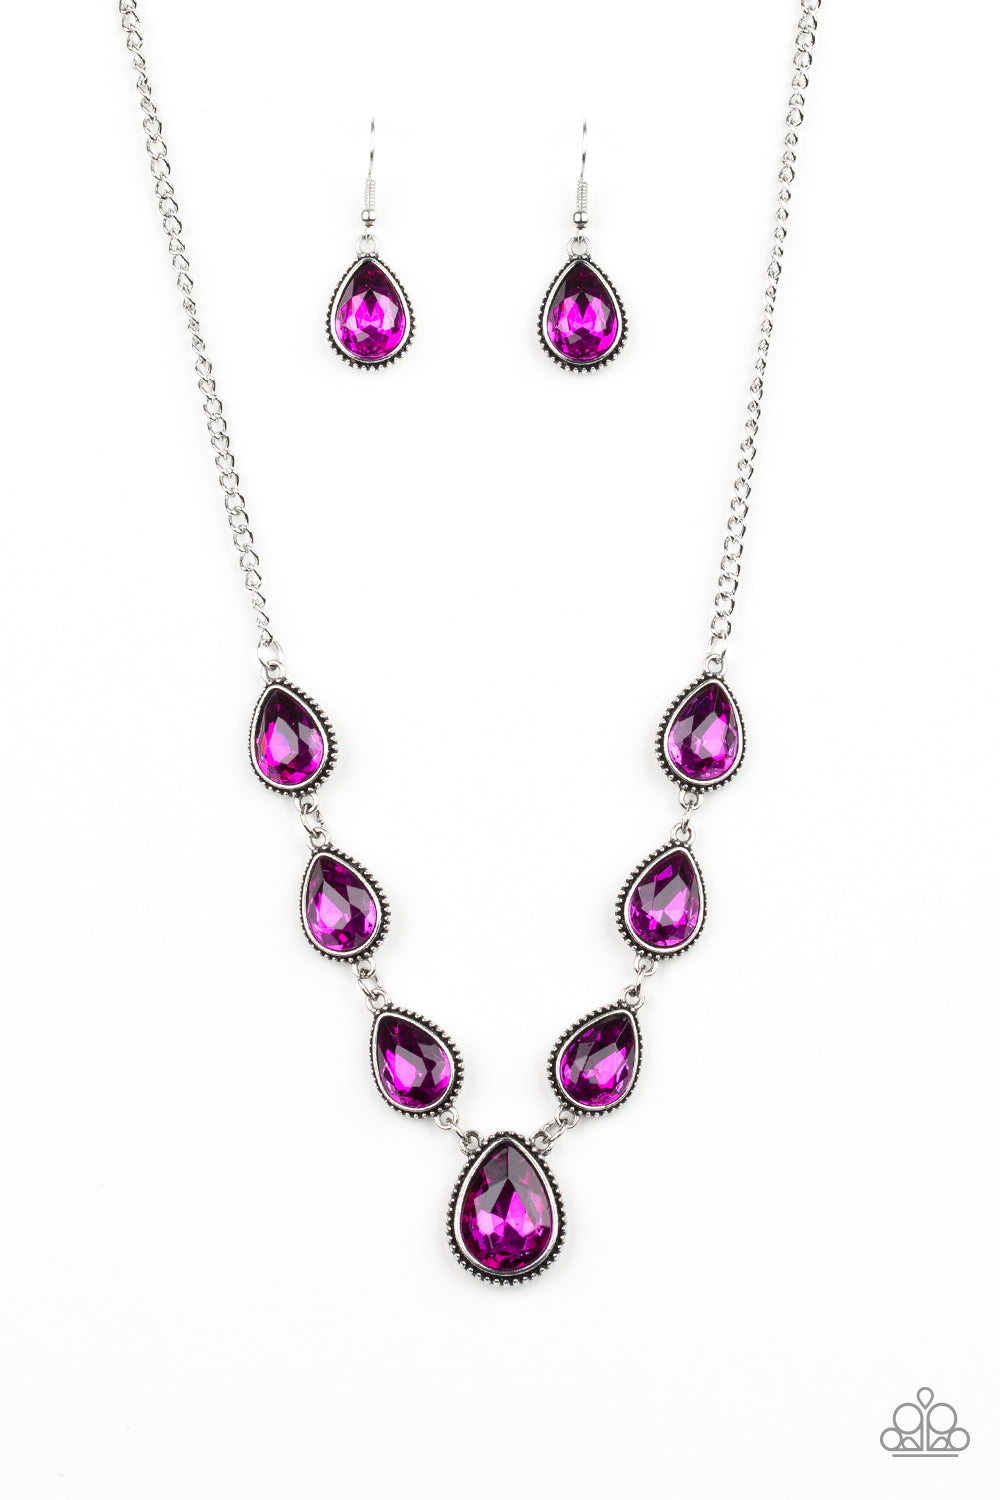 Socialite Social - Pink - Spiffy Chick Jewelry